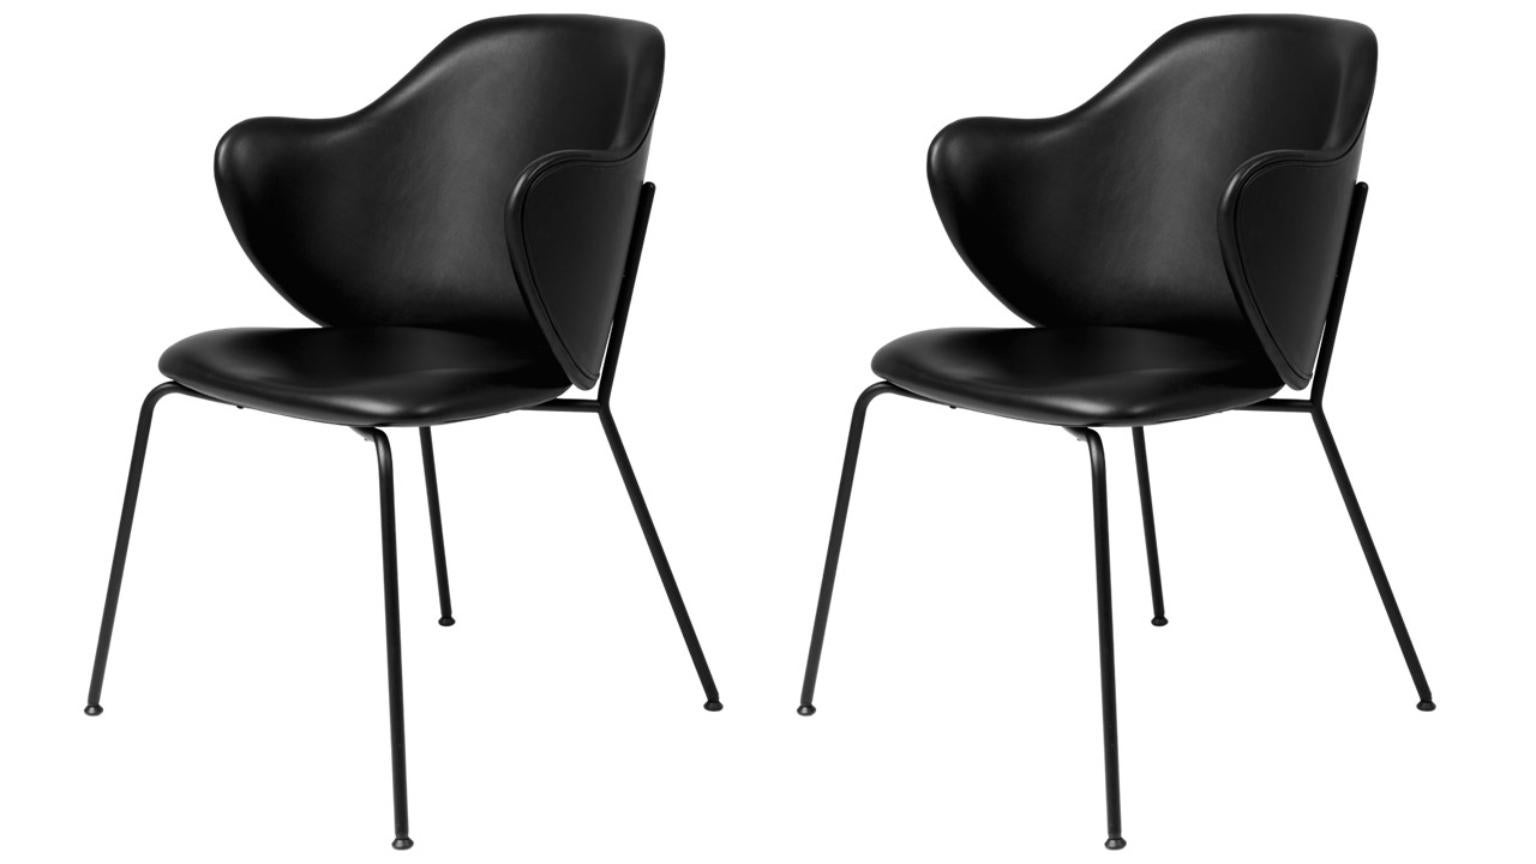 Set of 2 black leather Lassen chairs by Lassen
Dimensions: W 58 x D 60 x H 88 cm 
Materials: Leather

The Lassen Chair by Flemming Lassen, Magnus Sangild and Marianne Viktor was launched in 2018 as an ode to Flemming Lassen’s uncompromising